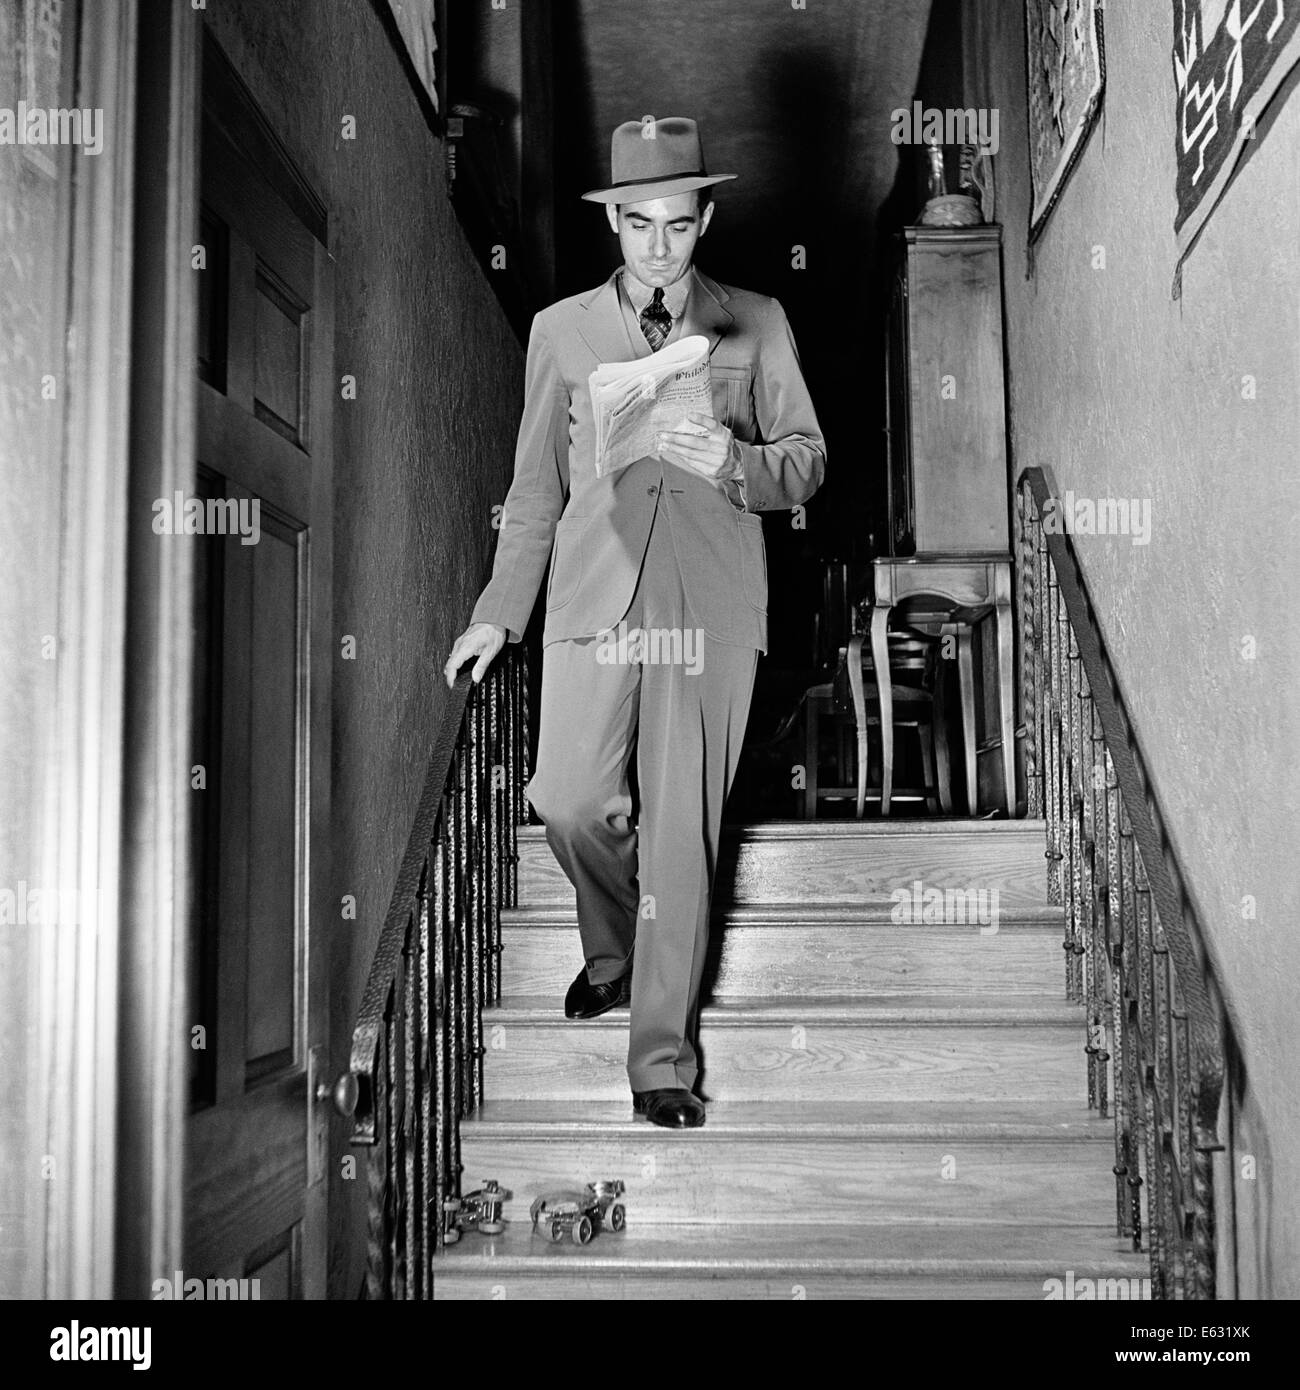 1930s 1940s ACCIDENT ABOUT TO HAPPEN MAN WALKING DOWN STAIRS SLIP ON PAIR OF ROLLER SKATES Stock Photo